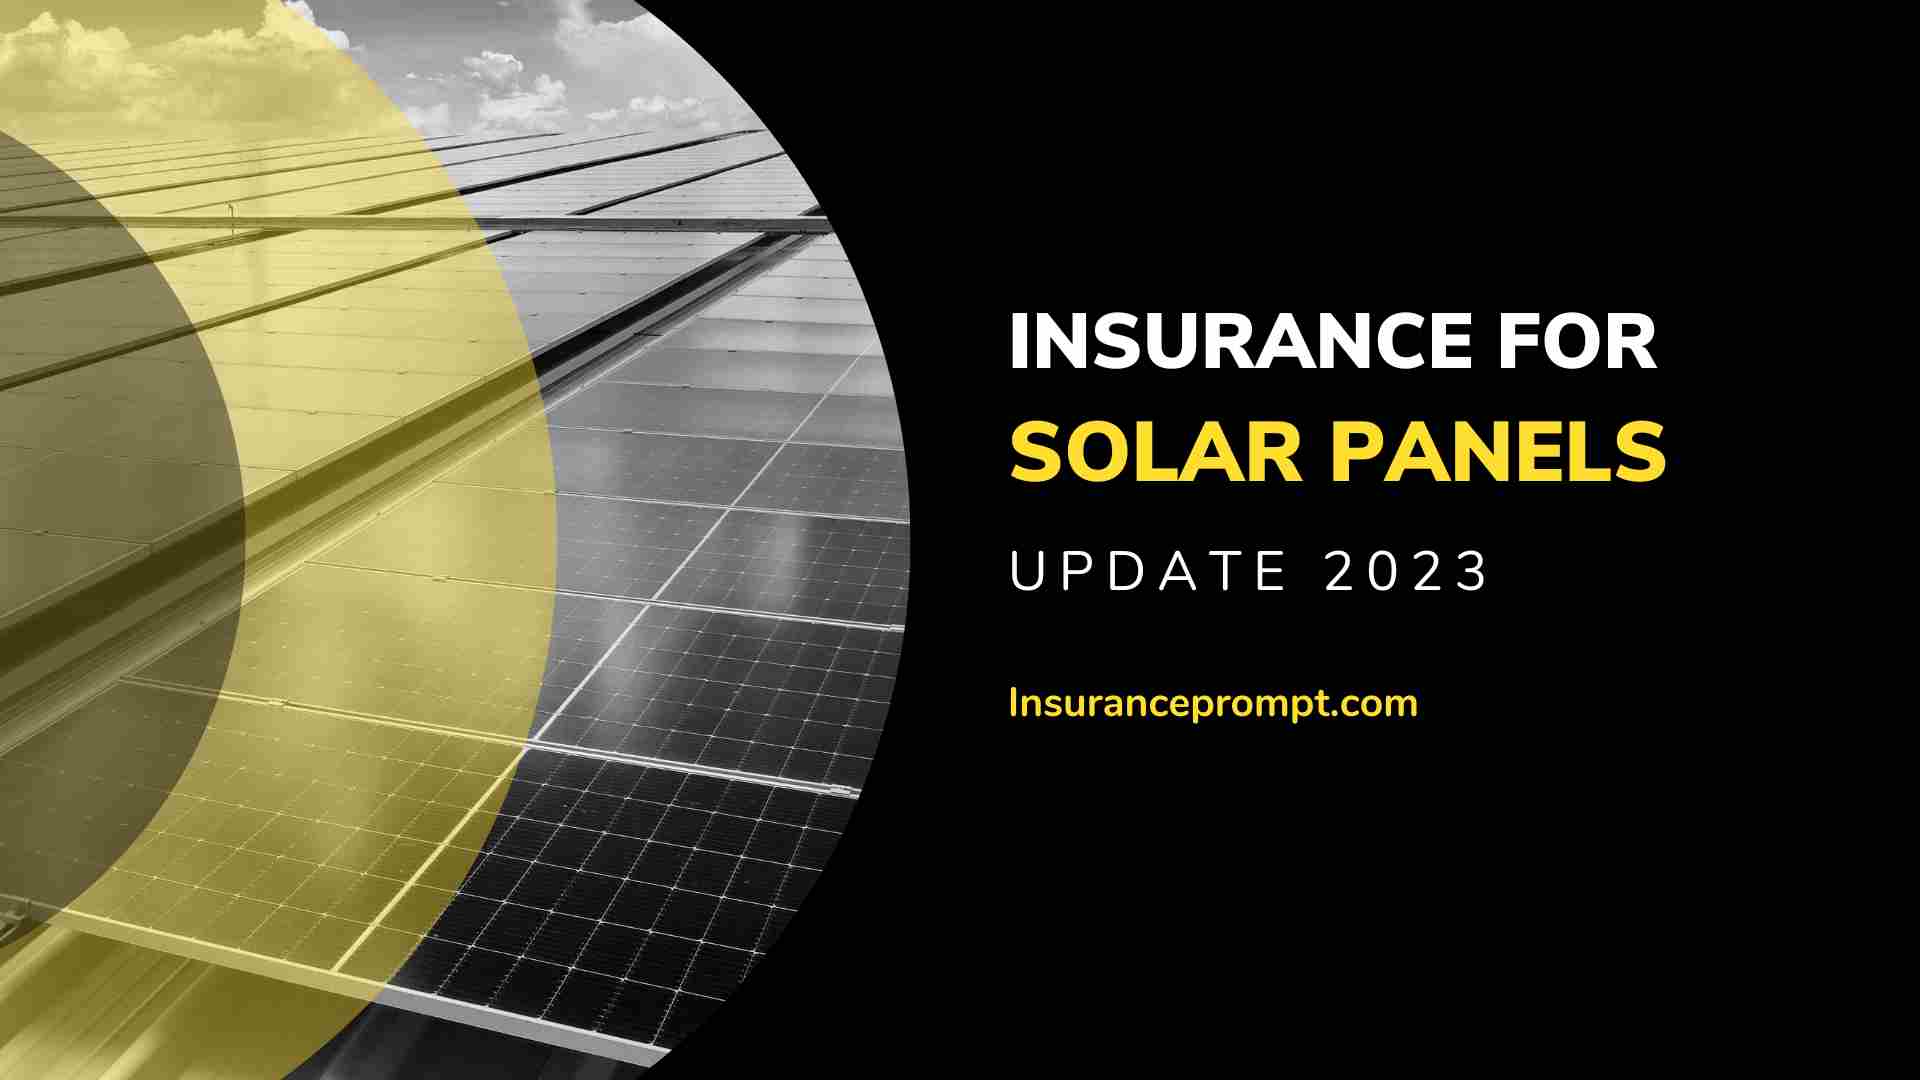 Insurance for Solar Panels: Coverage and Benefits Explained